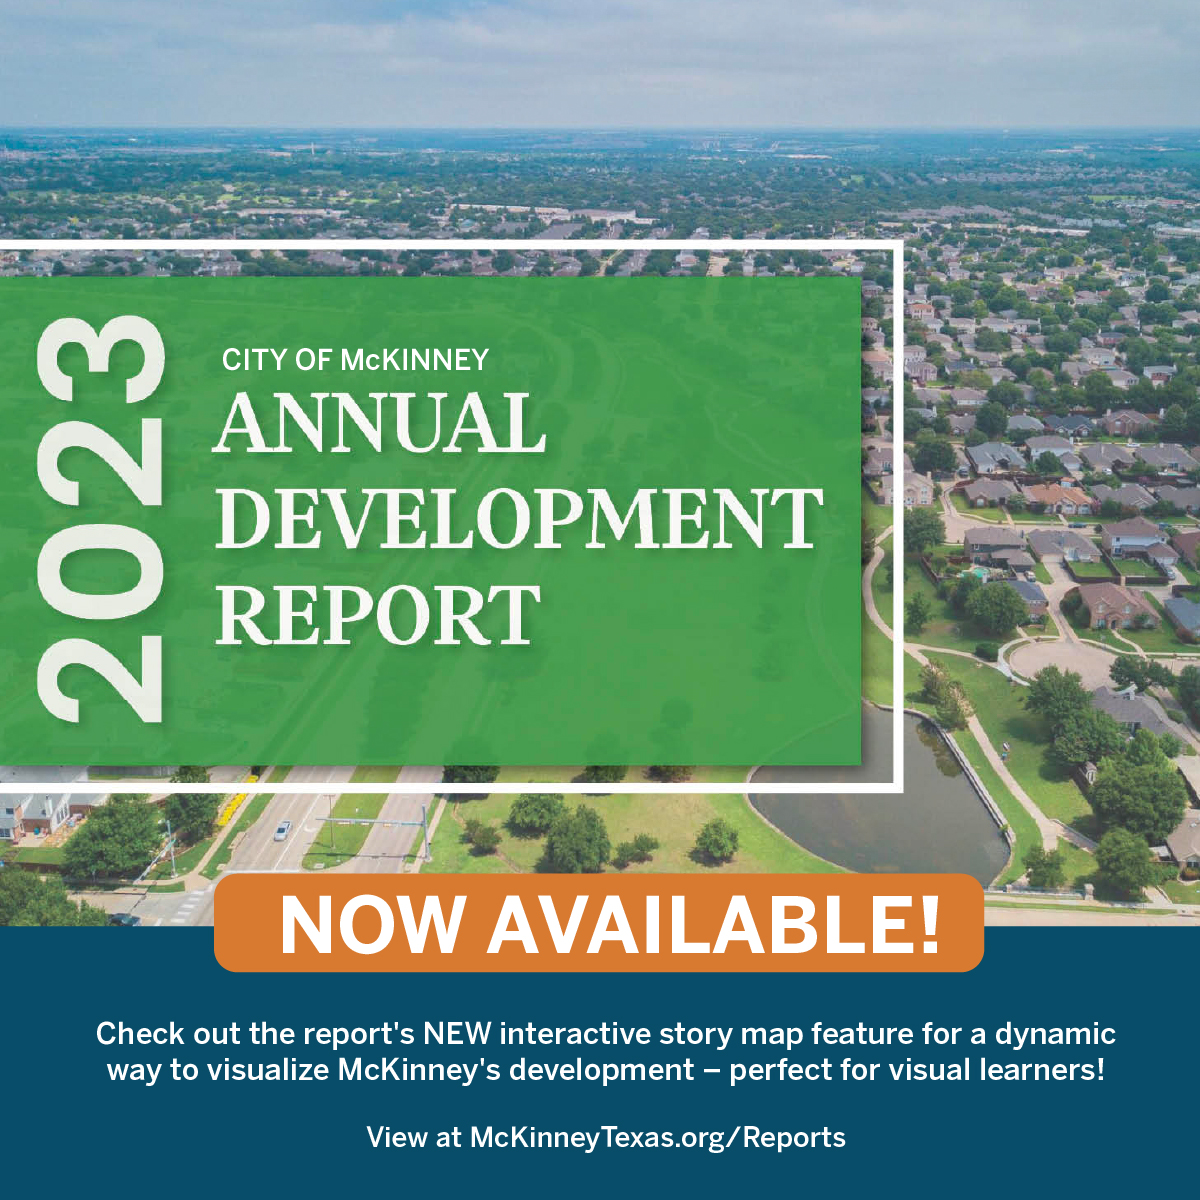 The Annual Development Report is now available! Check out the report's NEW interactive story map feature for a dynamic way to visualize McKinney's development! View report: bit.ly/3I8CFYm View Interactive Story Map feature: bit.ly/49pA1K2